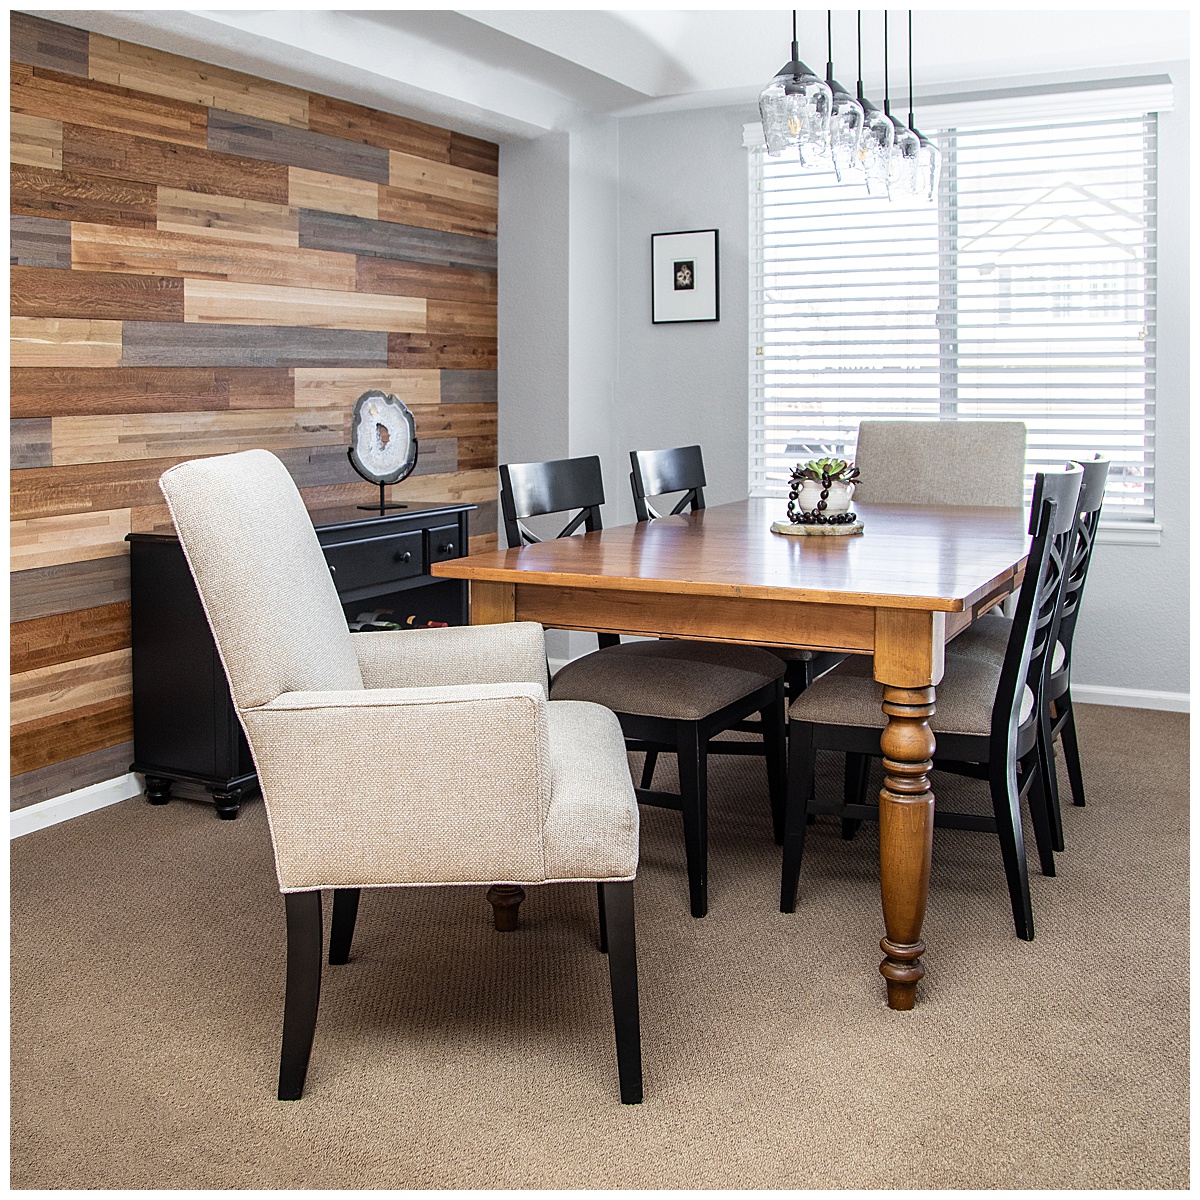 A dining room with gray walls and a wood accent wall. The floor is beige carpet and there is a window on the back wall. The table is brown finished wood, the chairs are black wood, and there is a head chair that is plush and cream colored.